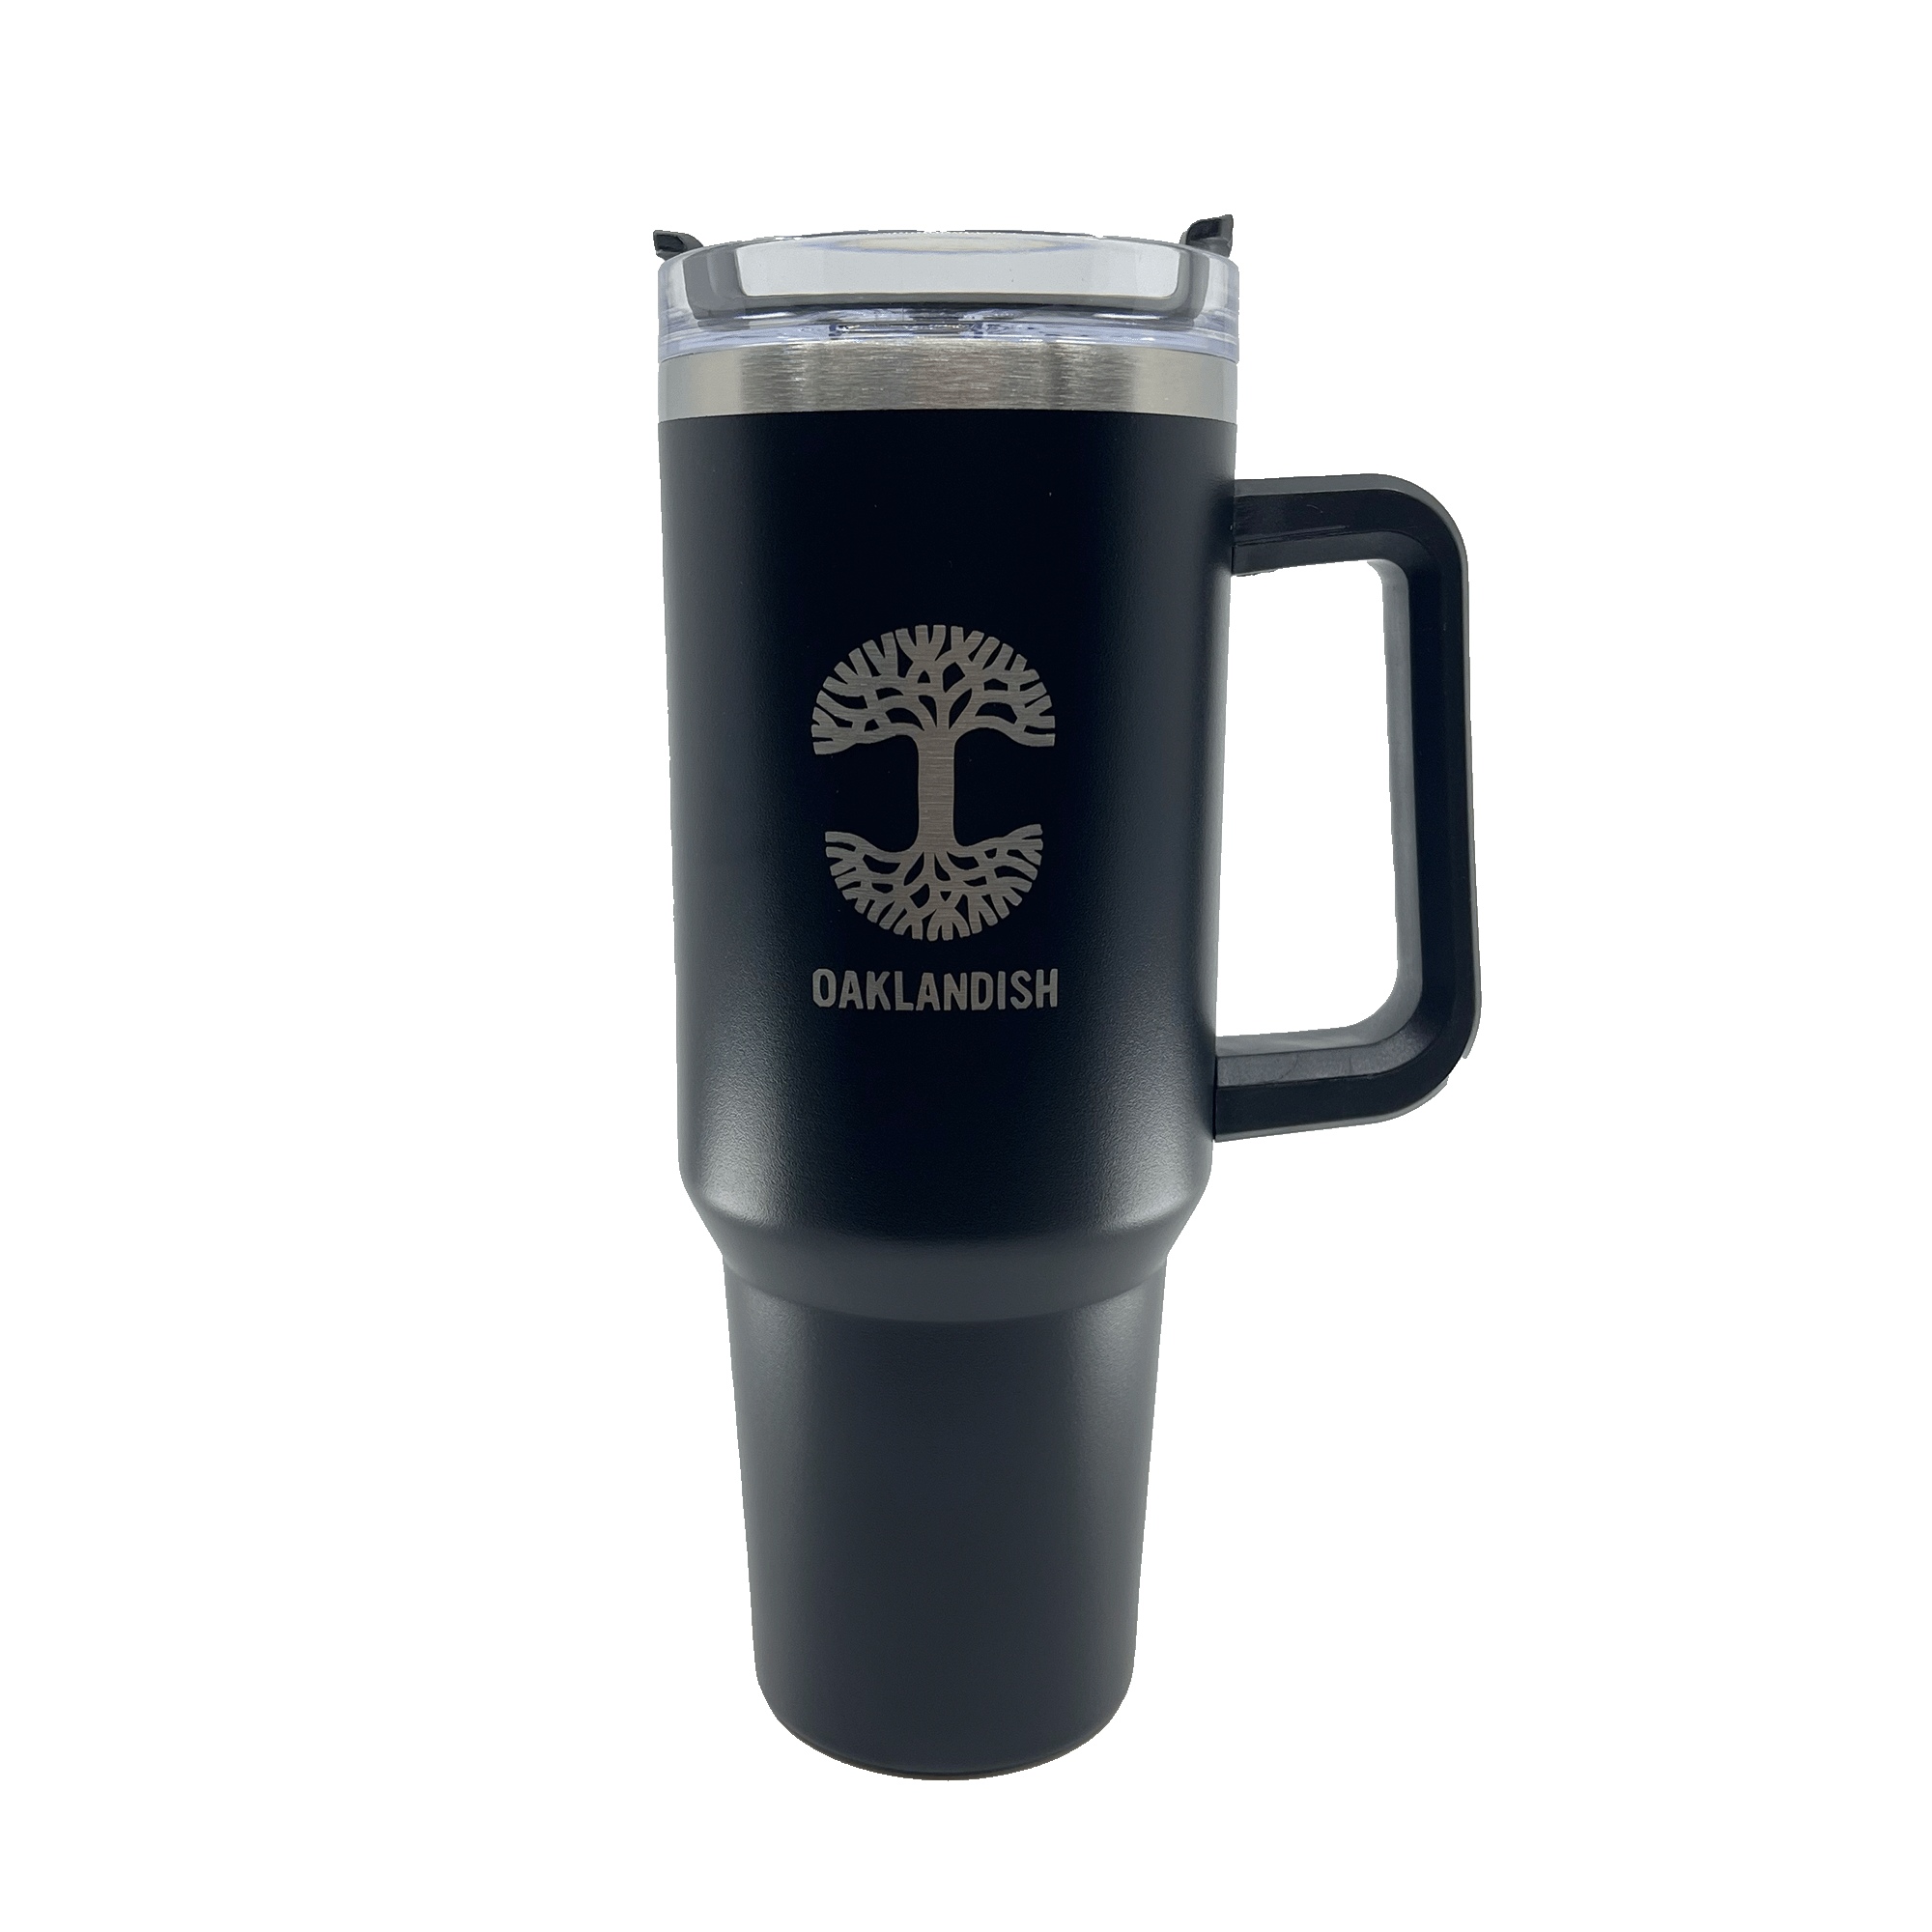 Black double walled 40-oz stainless steel travel drink tumbler with silver Oaklandish log and wordmark and airtight lid.